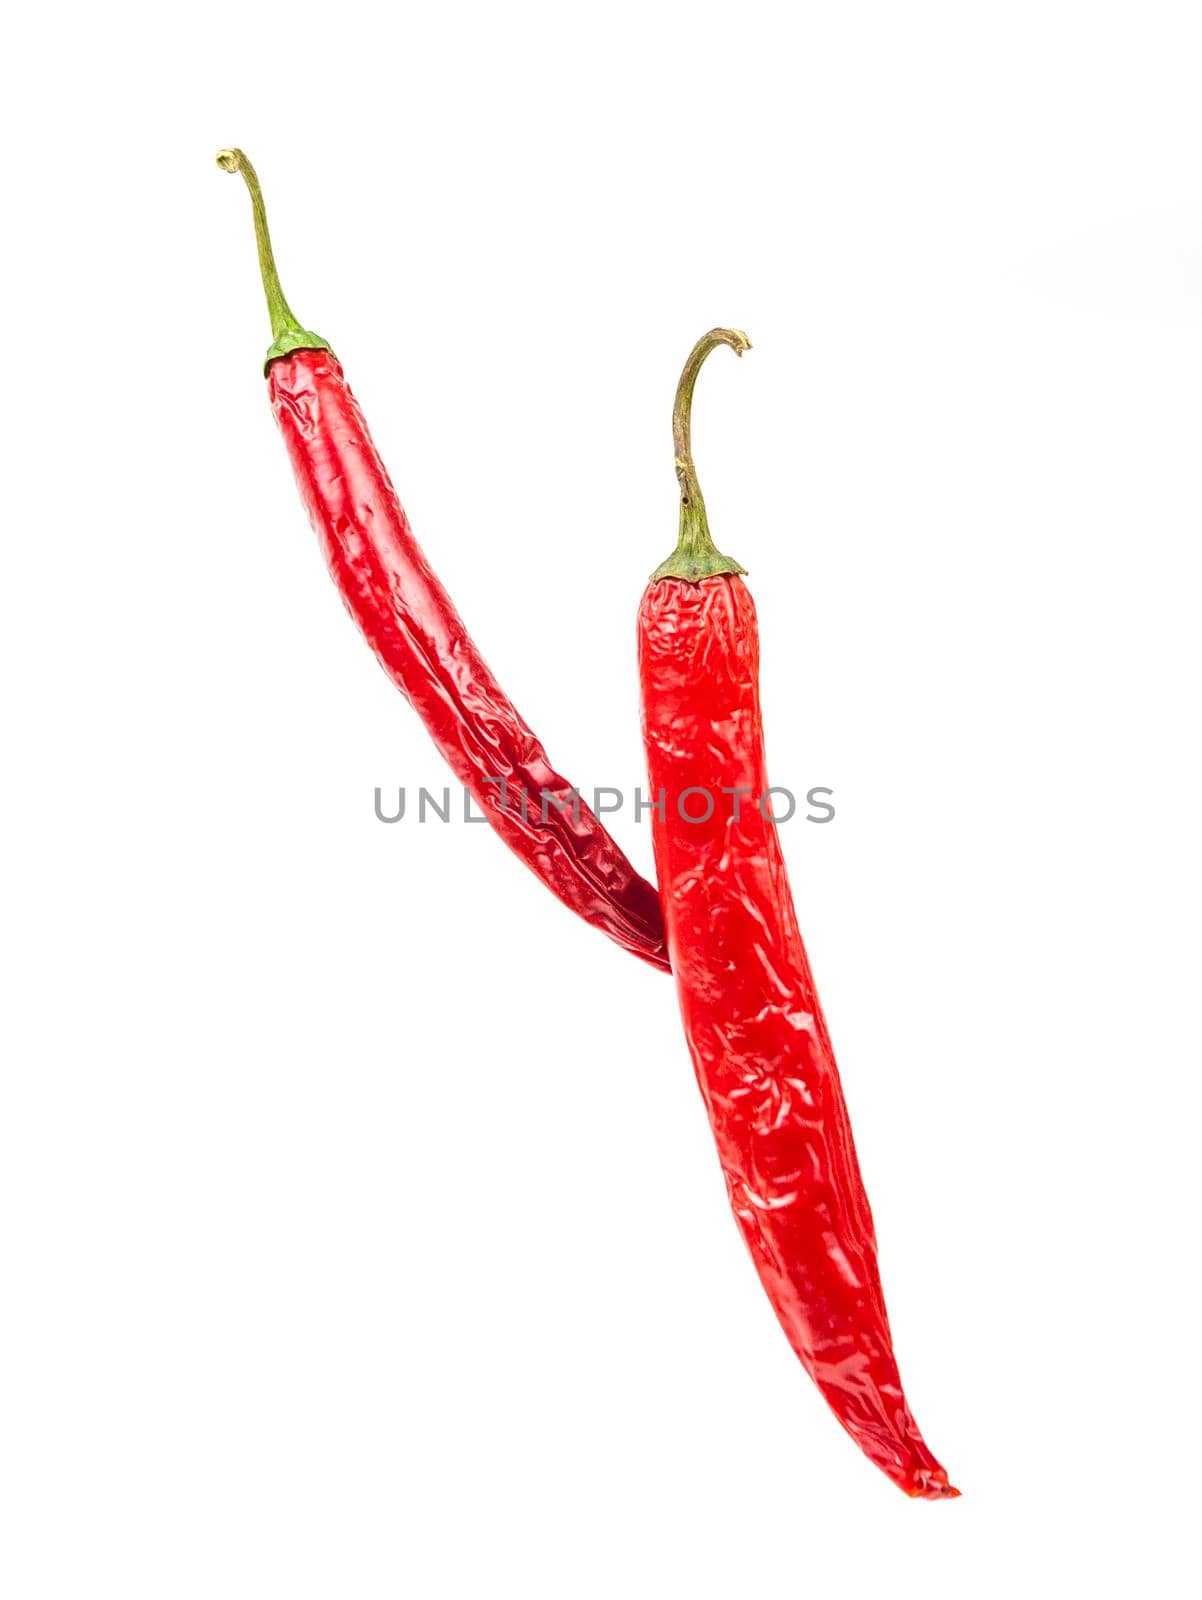 Falling red chili or chilli pepper on white background